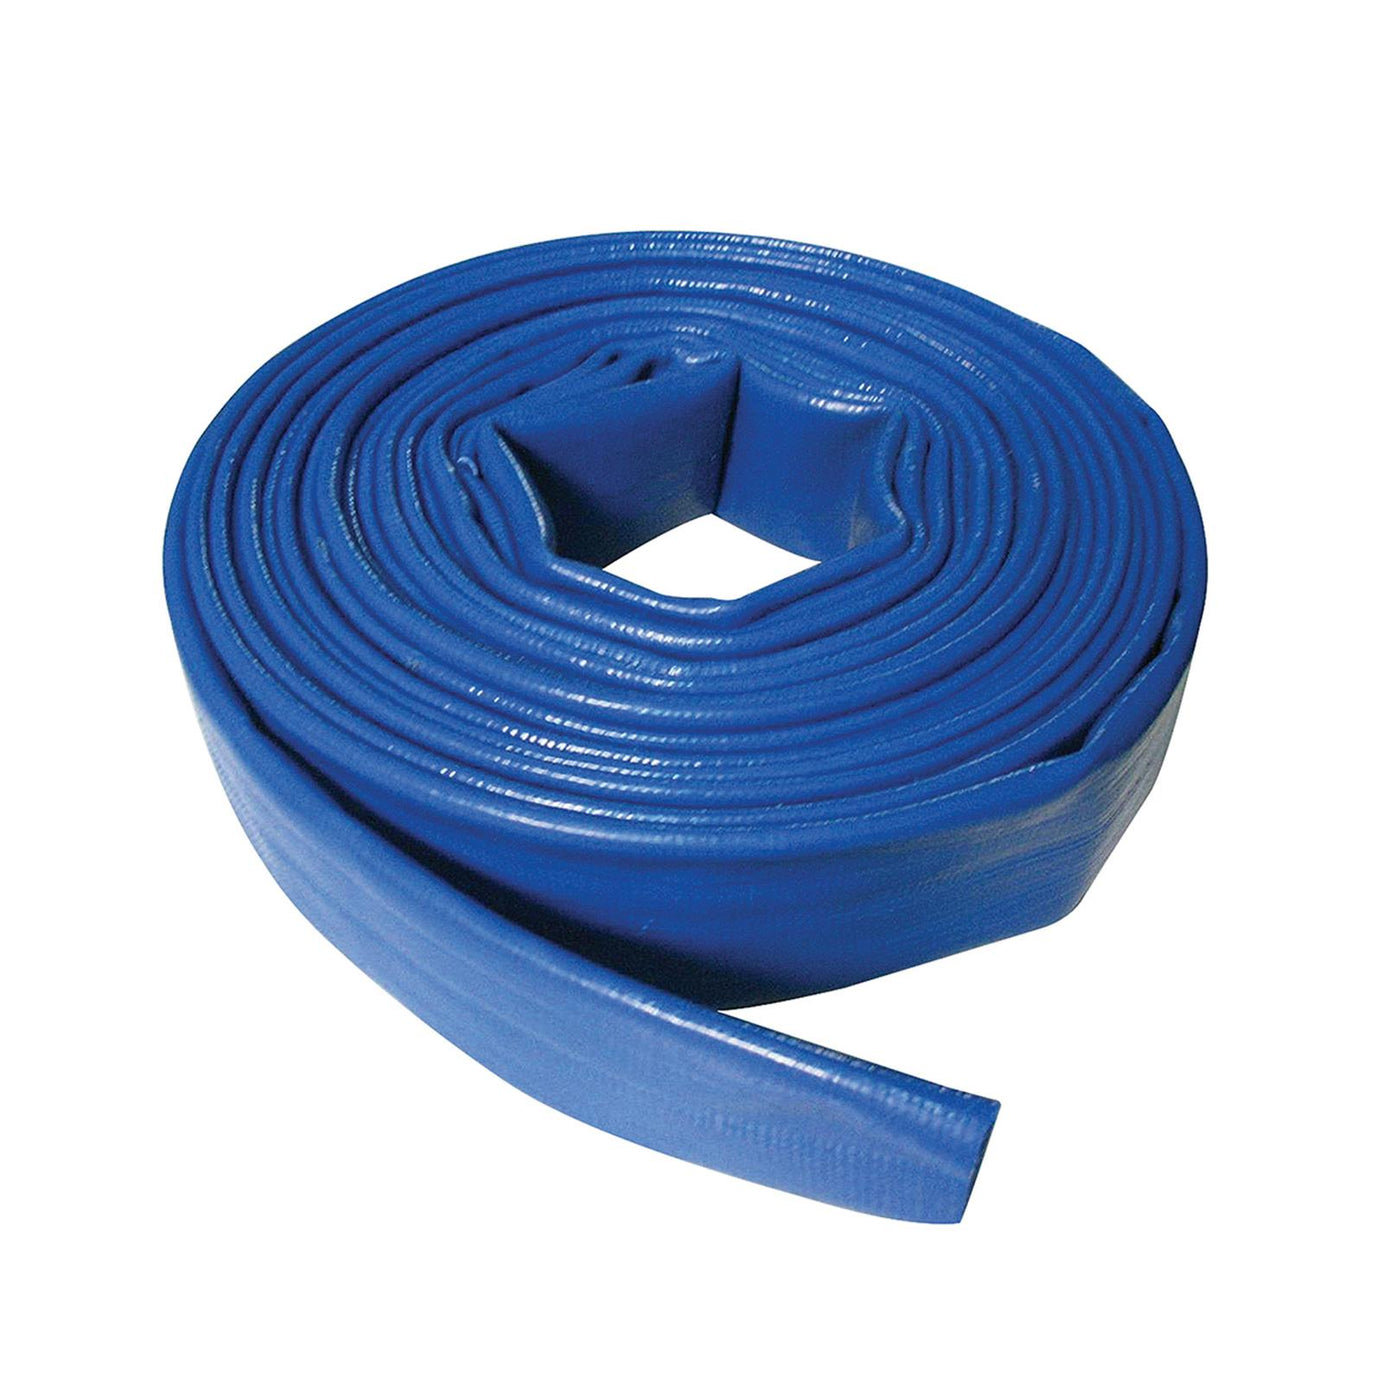 Lay Flat Hose 10M X 25mm Pvc Water Delivery Hose Discharge Pump Irrigation